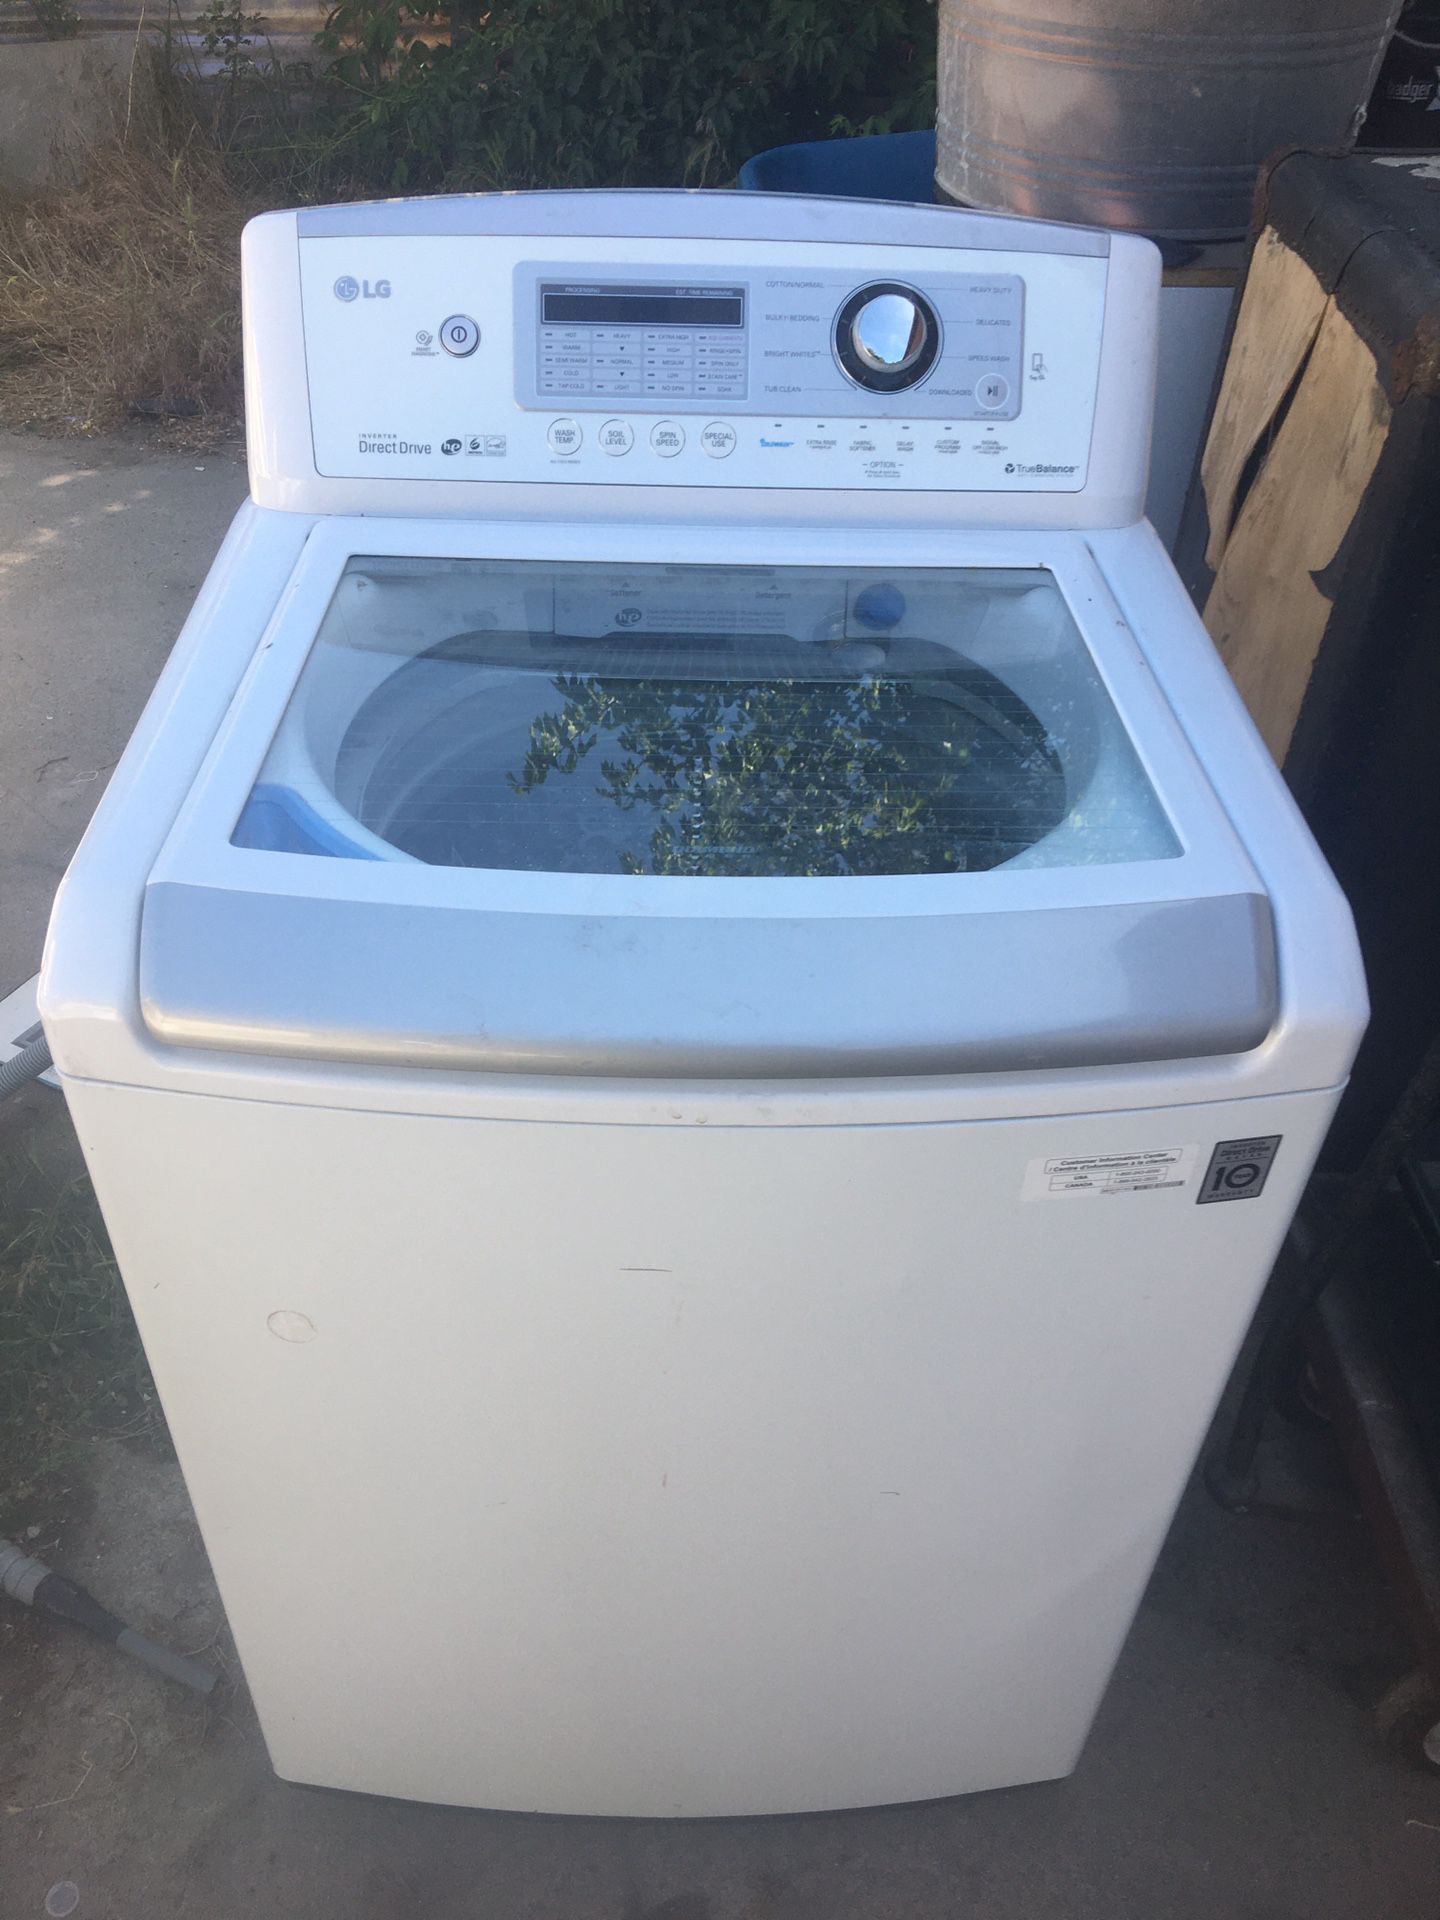 LG Washer 2 years old